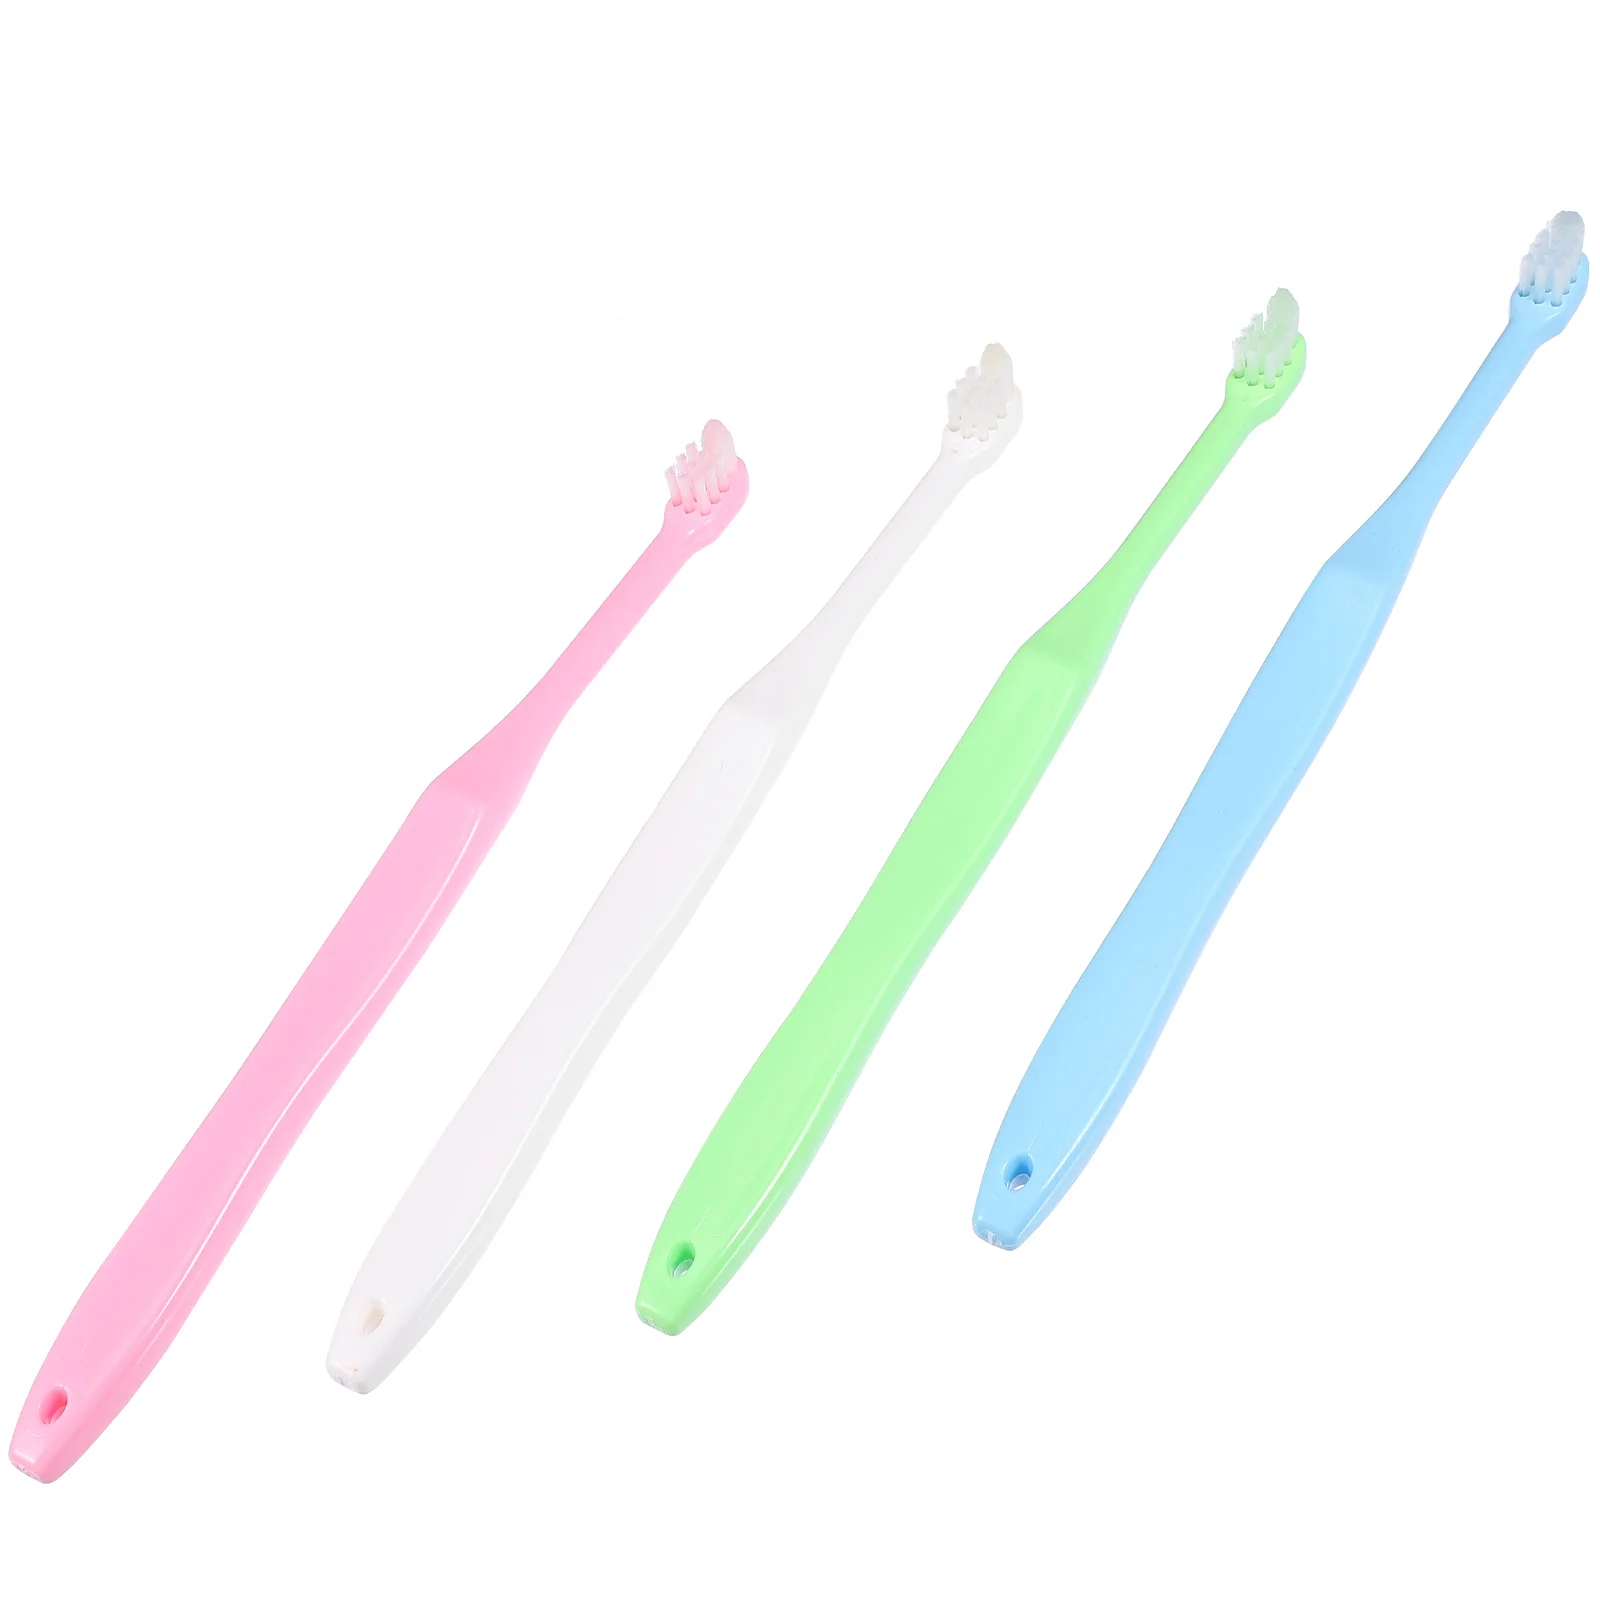 

Brush Interdental Tuft Toothbrushes Floss Braces Flossers End Soft Ortho Cleaners Picks Single Brushes Tooth Travel Shape Adults